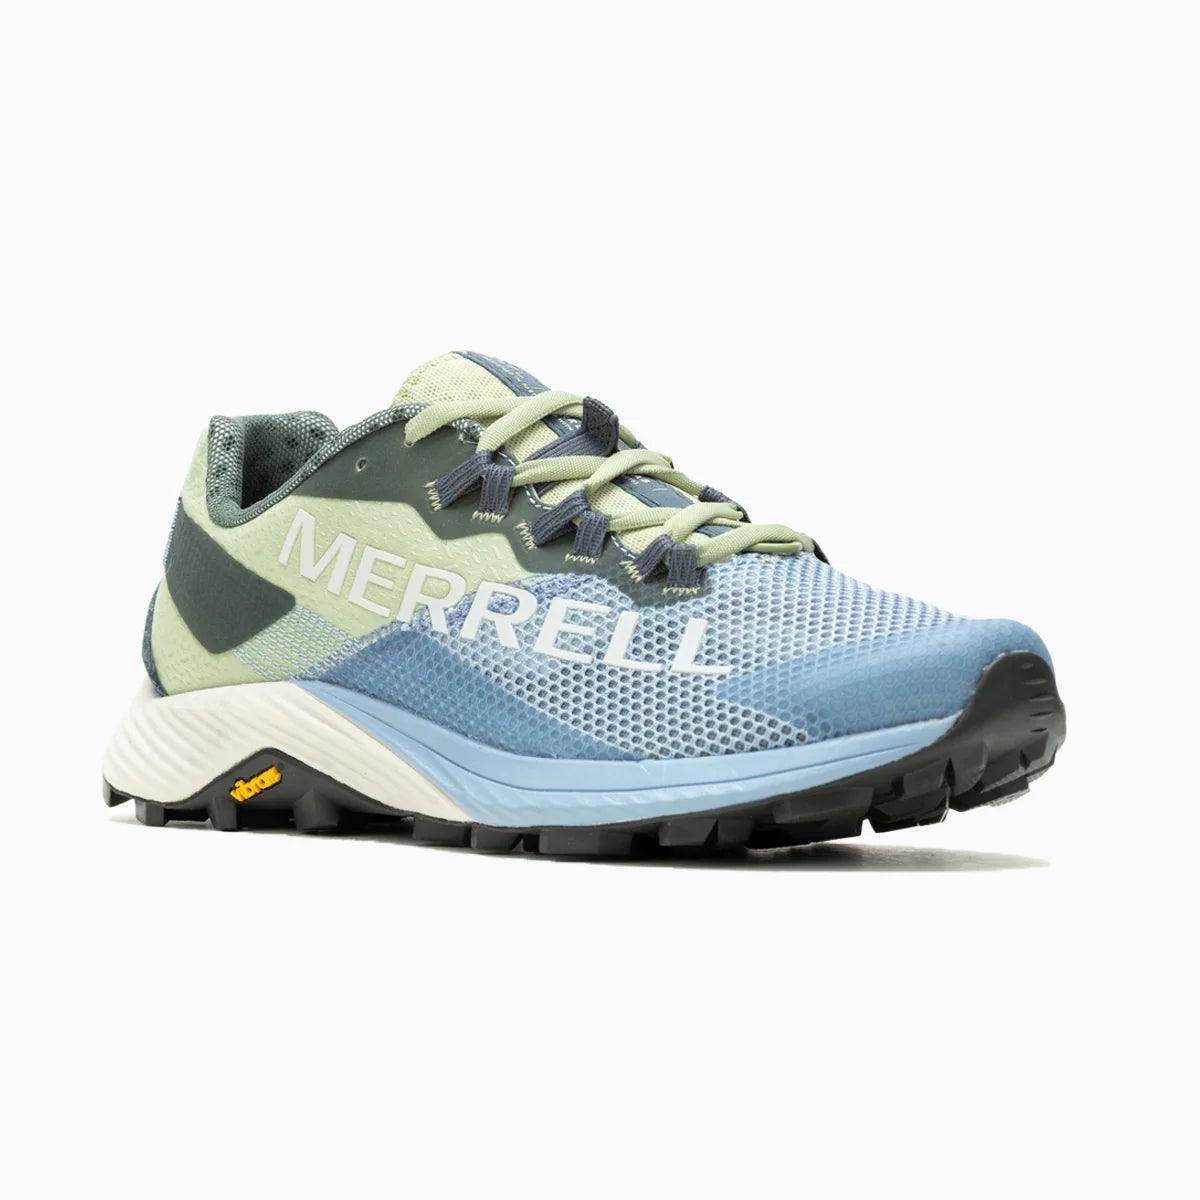 Merrell - Merrell Women’s MTL Long Sky 2 Trail Shoes - The Shoe Collective